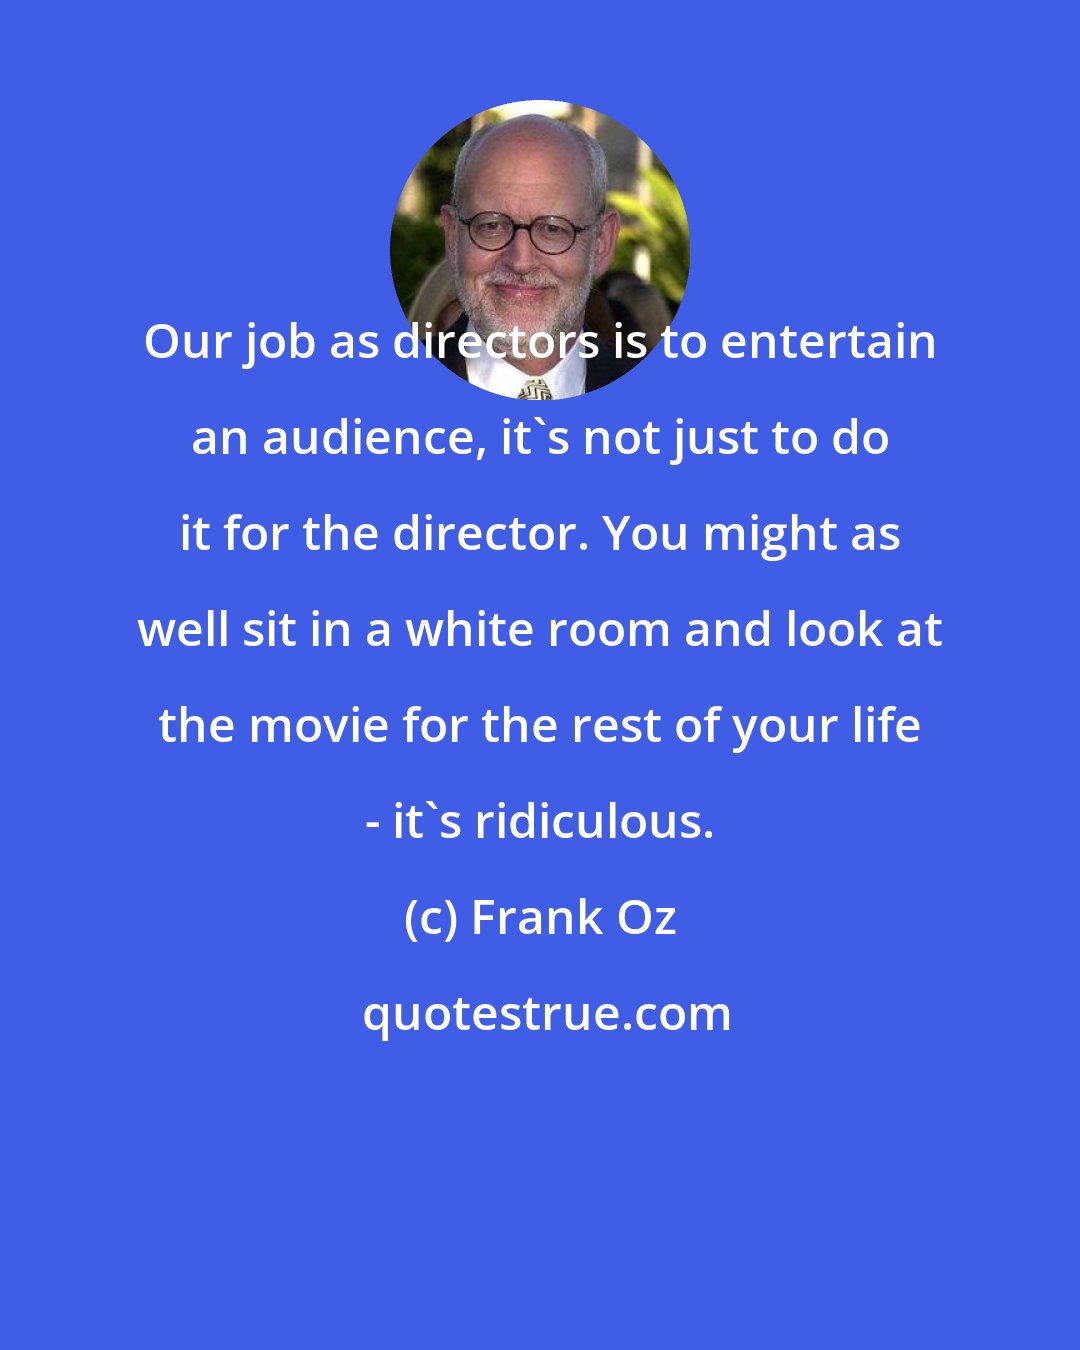 Frank Oz: Our job as directors is to entertain an audience, it's not just to do it for the director. You might as well sit in a white room and look at the movie for the rest of your life - it's ridiculous.